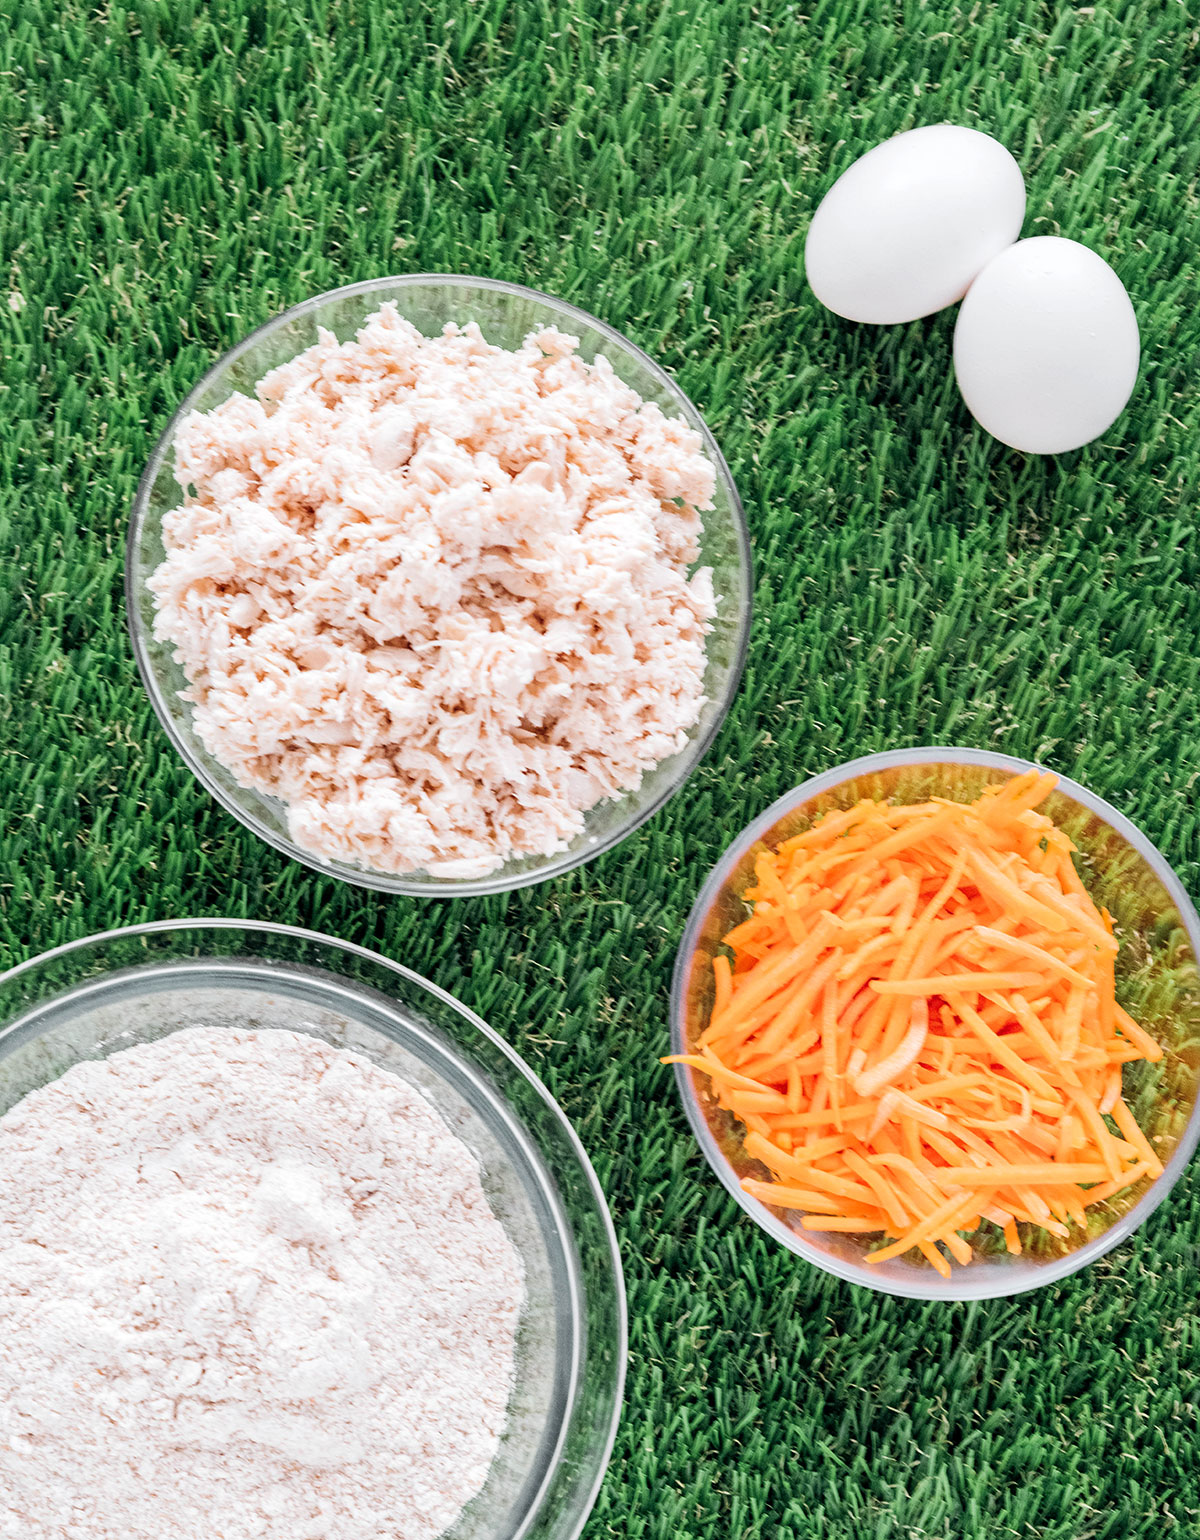 Ingredients for these treats including shredded chicken, carrots, flour, and eggs.